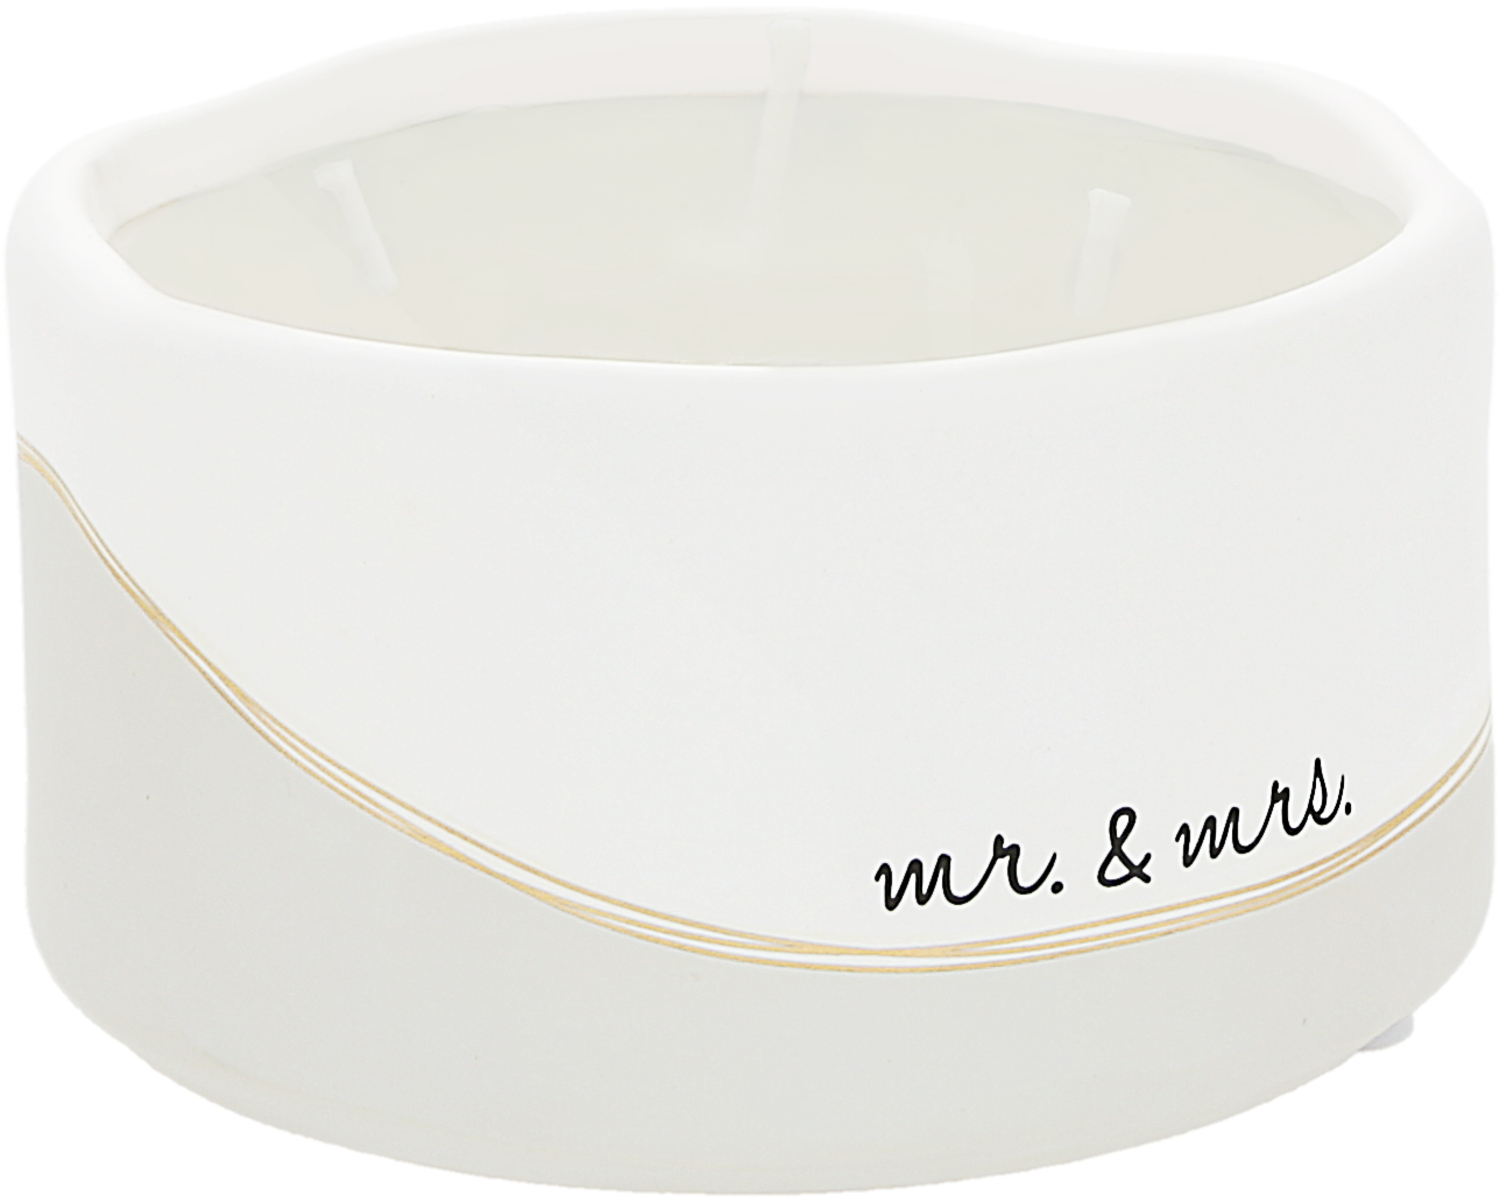 Mr. & Mrs. by Love Grows - Mr. & Mrs. - 8 oz - 100% Soy Wax Reveal Candle
Scent: Tranquility